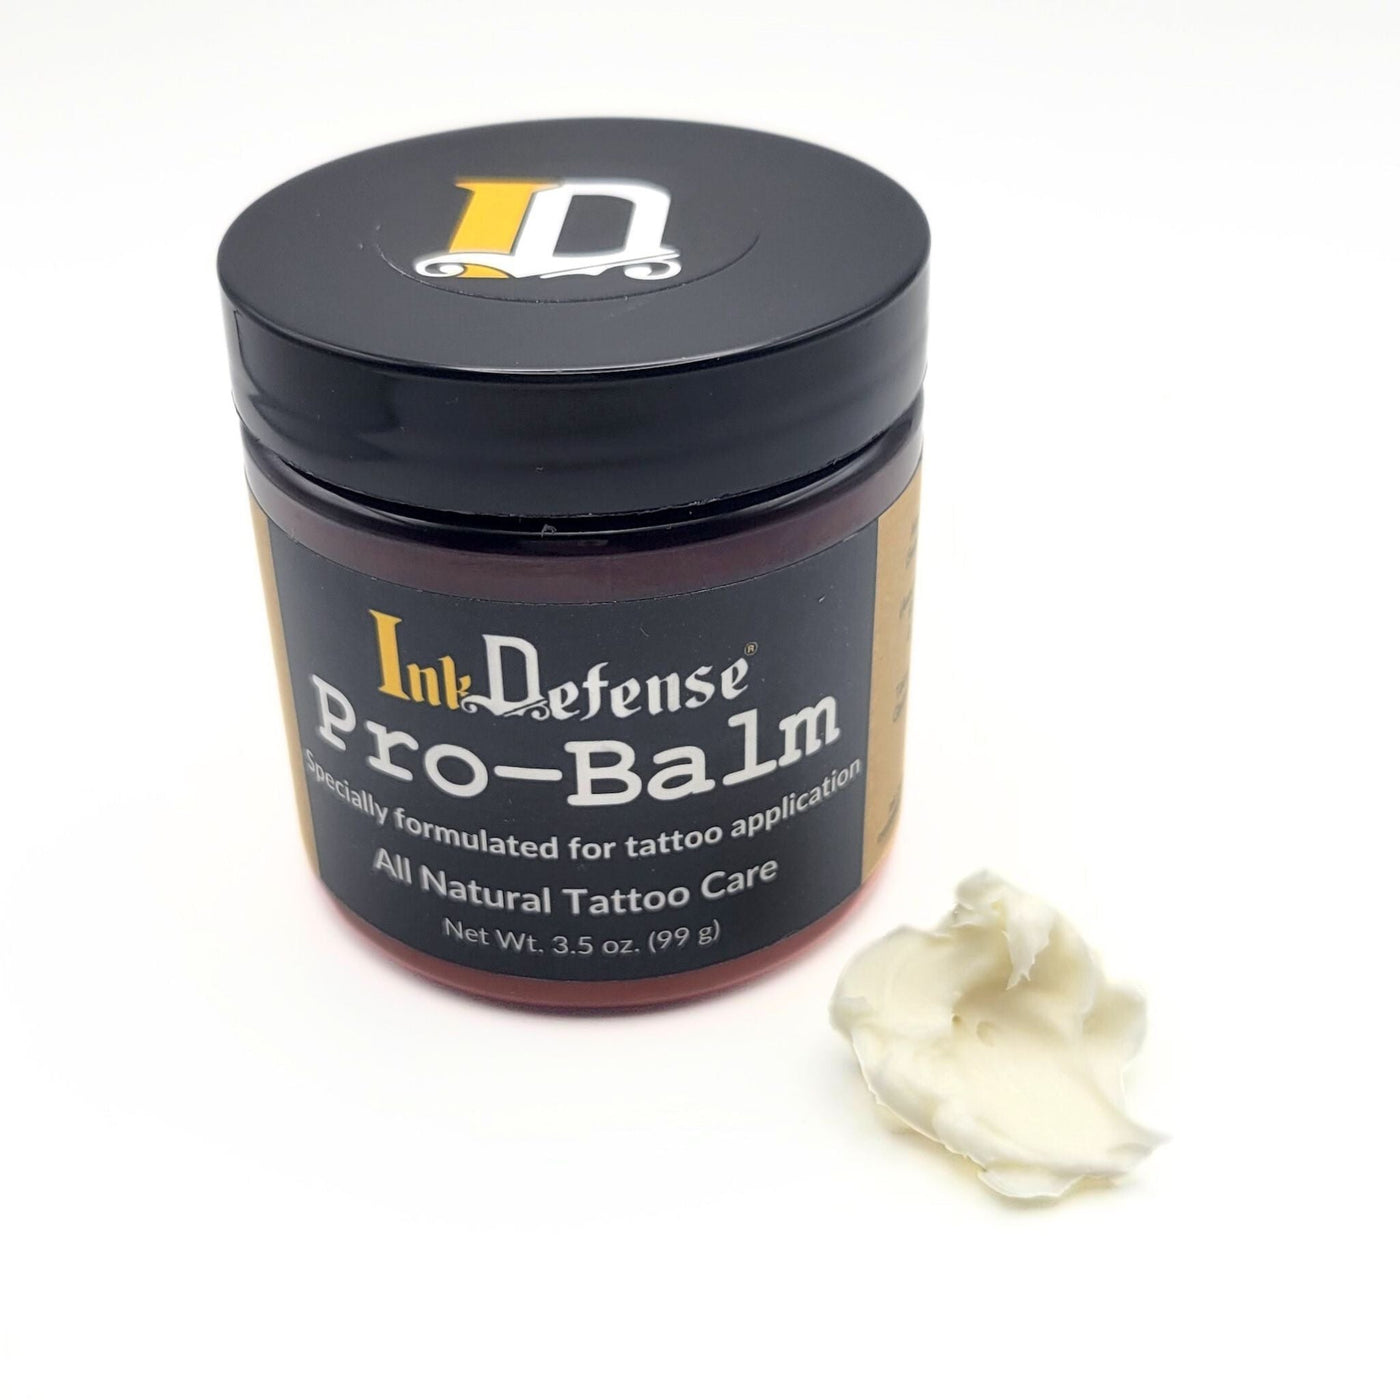 Pro-Balm for Tattoo Artists with product outside of container - Ink Defense